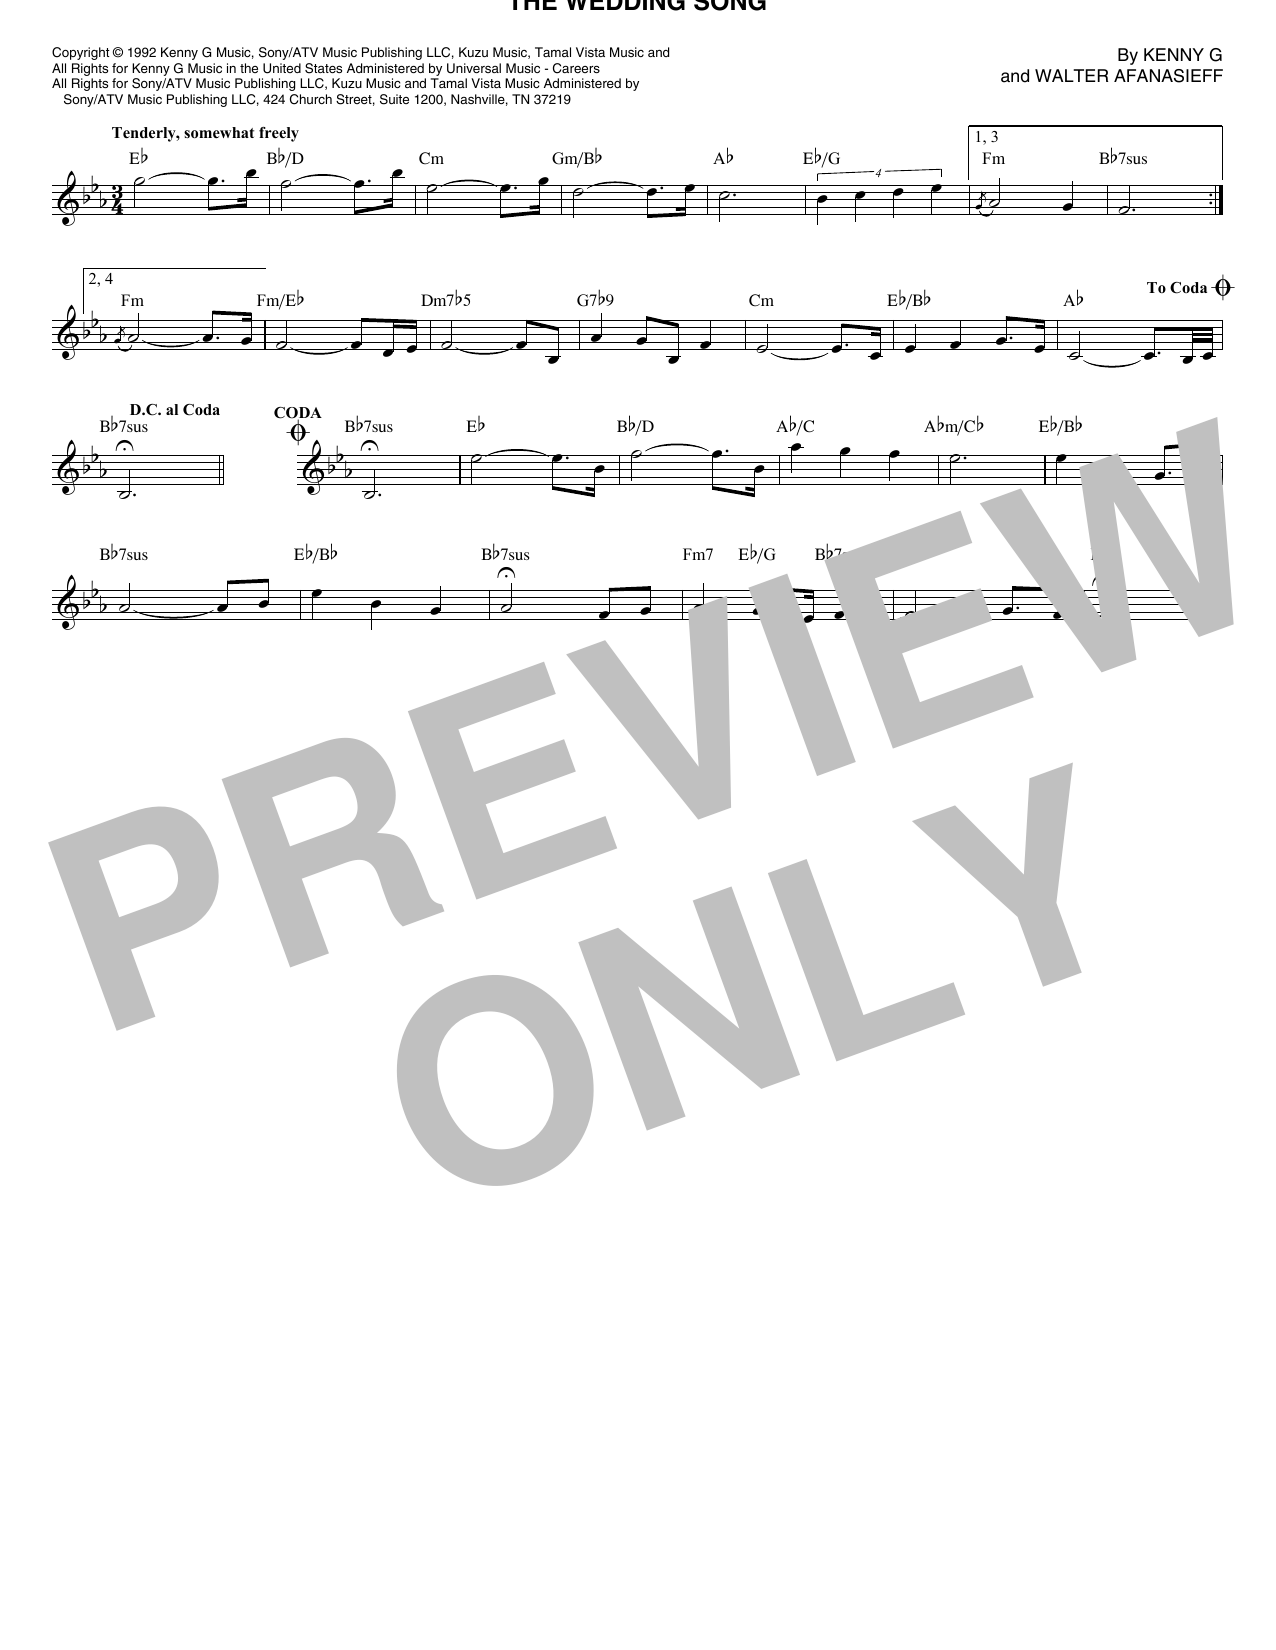 Download Kenny G The Wedding Song Sheet Music